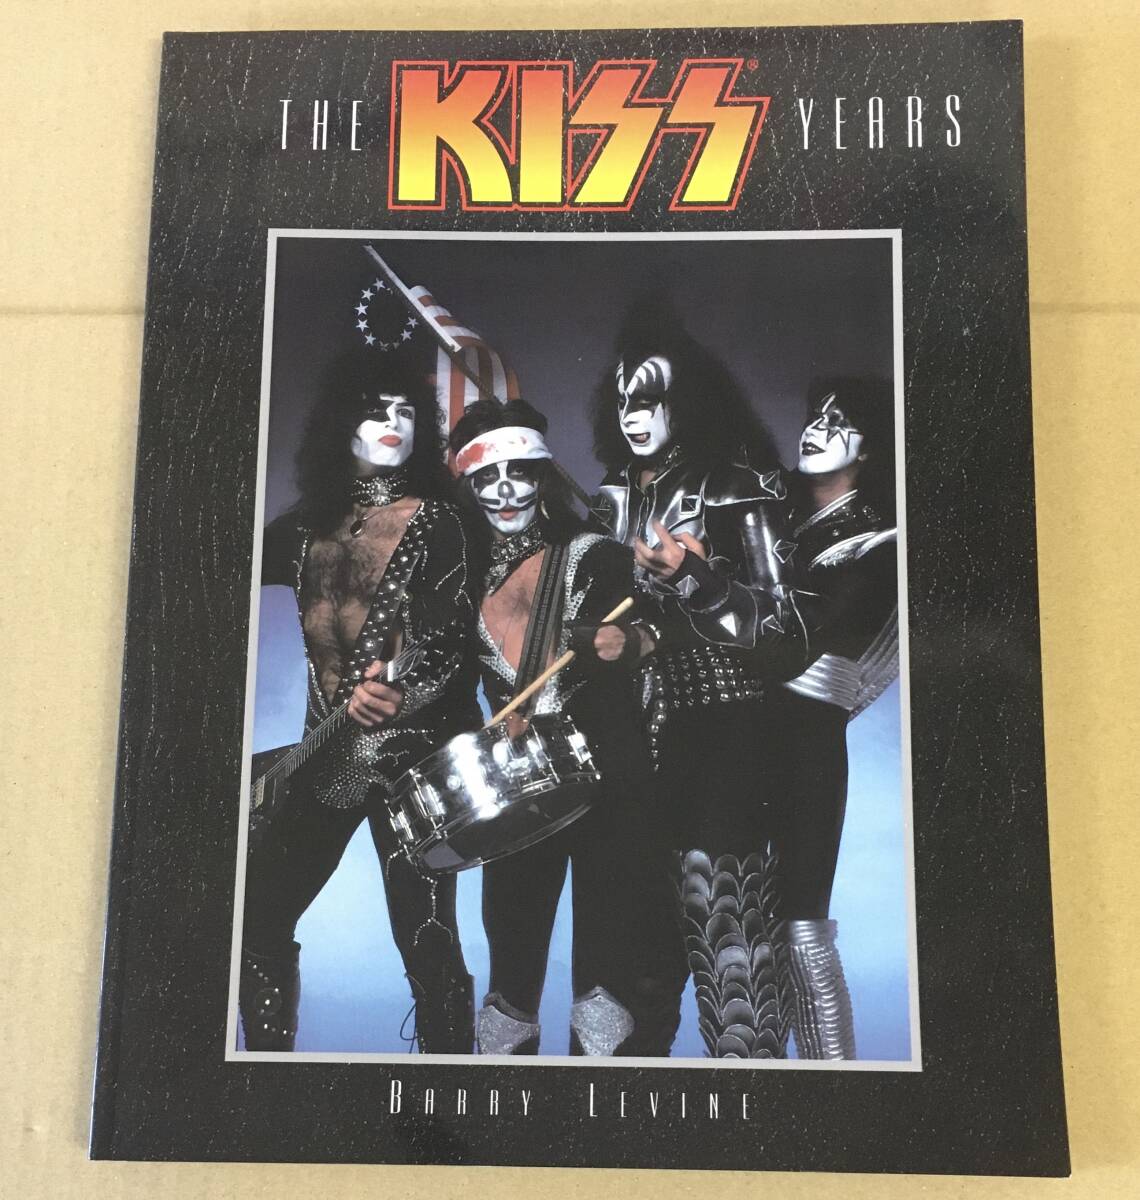  foreign book photoalbum kisKISS - THE KISS YEARS...h-2432 Paul Stanley / Gene Simmons / Ace Frehley / Peter Criss